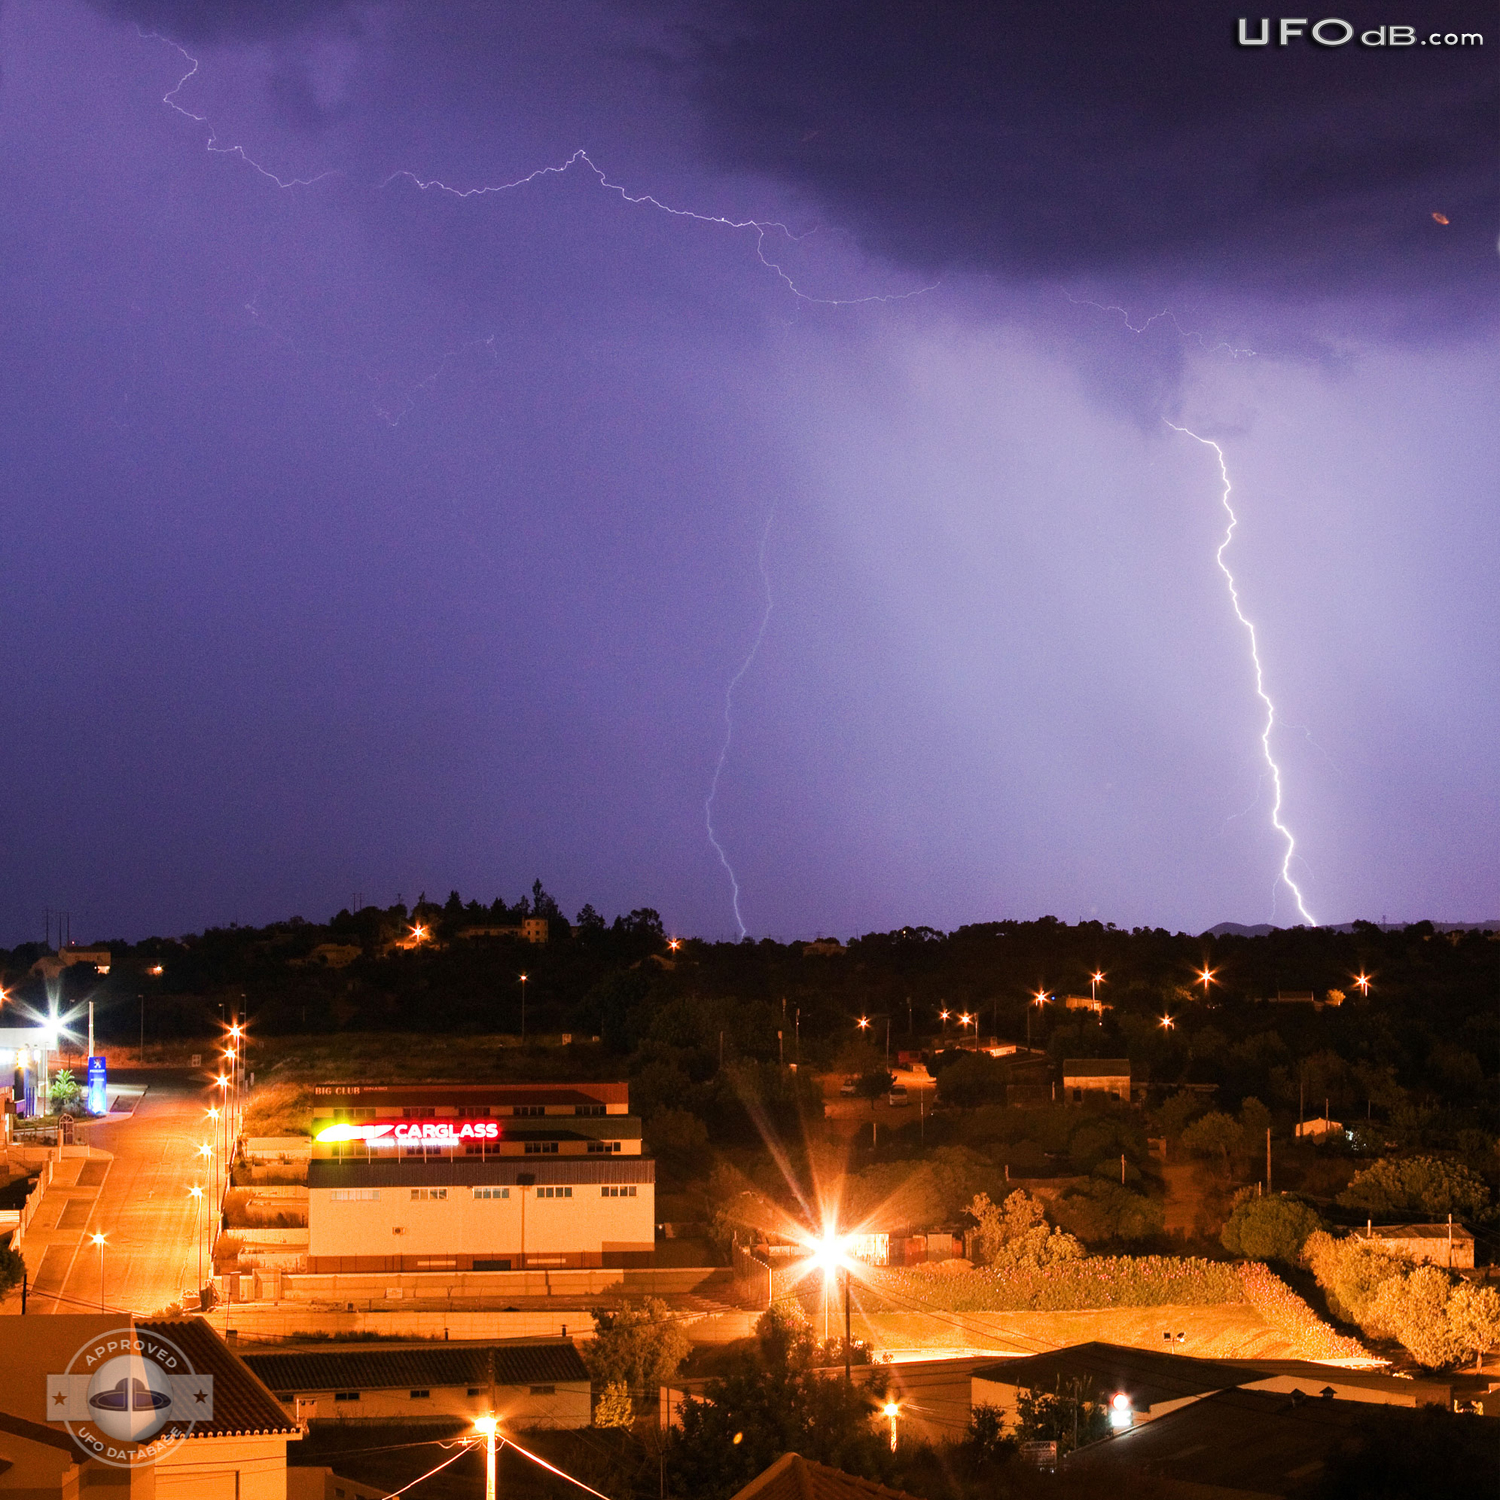 Professional photographer capture UFO near lightnings in Portugal 2010 UFO Picture #345-1